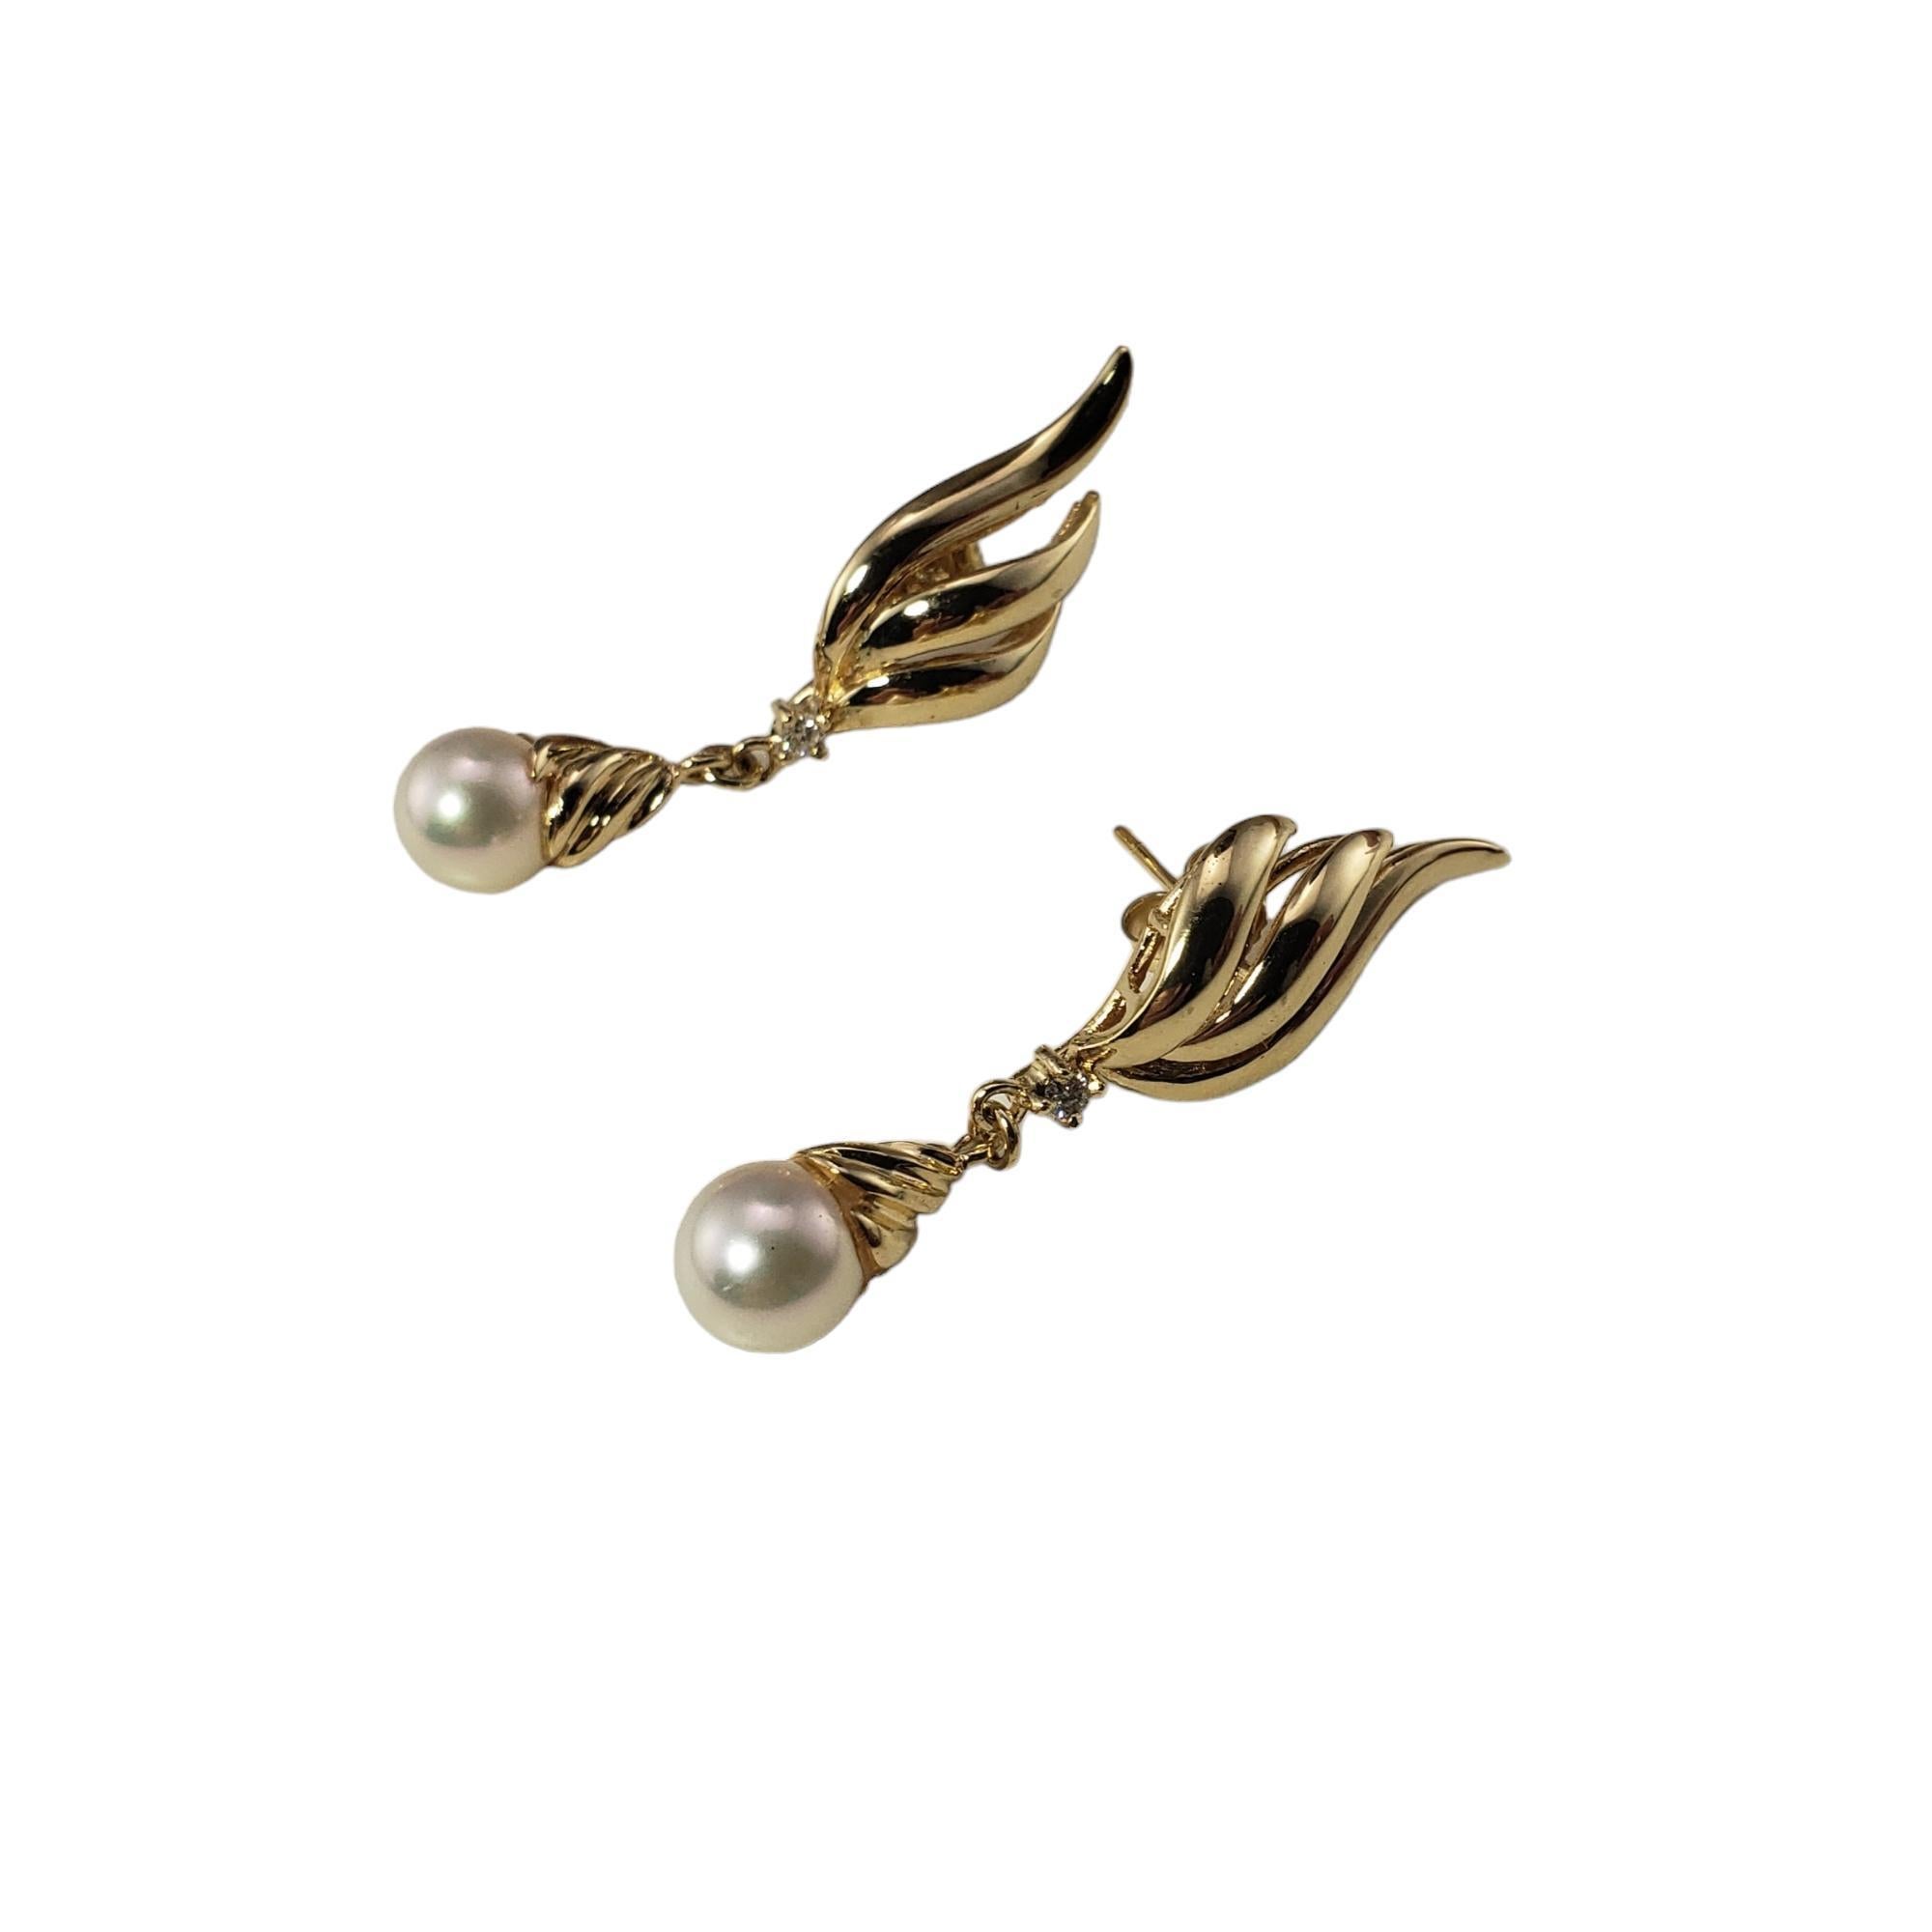 Vintage 14 Karat Yellow Gold Pearl and Diamond Earrings-

These elegant dangle earrings each feature one white pearl (7 mm) and one round brilliant cut diamond set in classic 14K yellow gold.  Push back closures.

Approximate total diamond weight: 